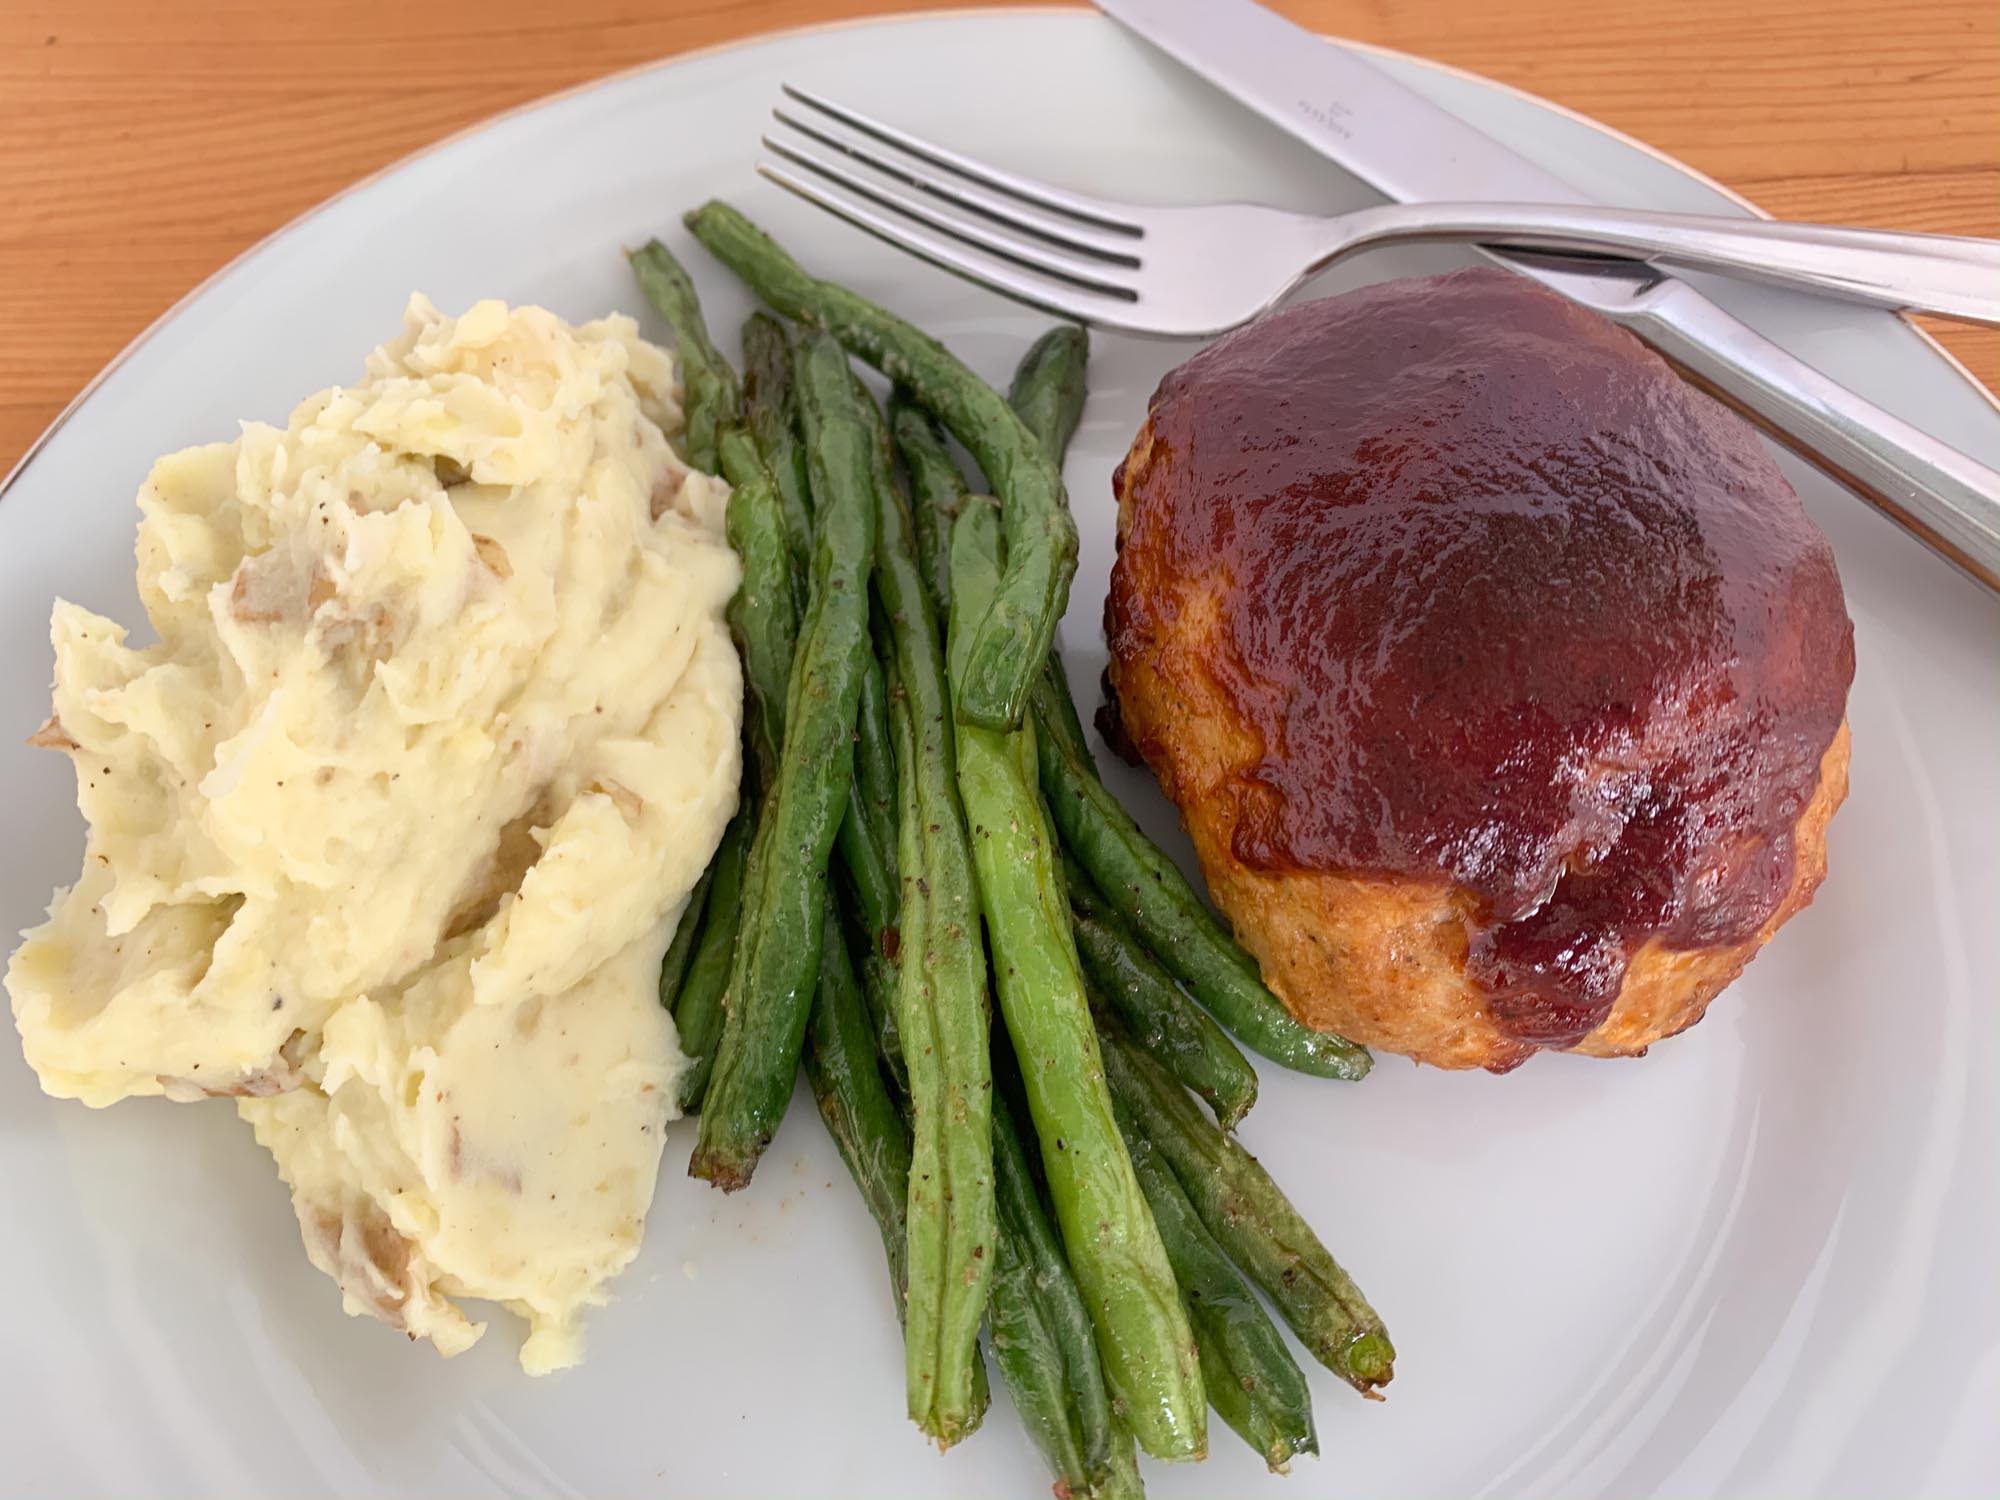 bbq apple meatlof, green beans, and mashed potatoes